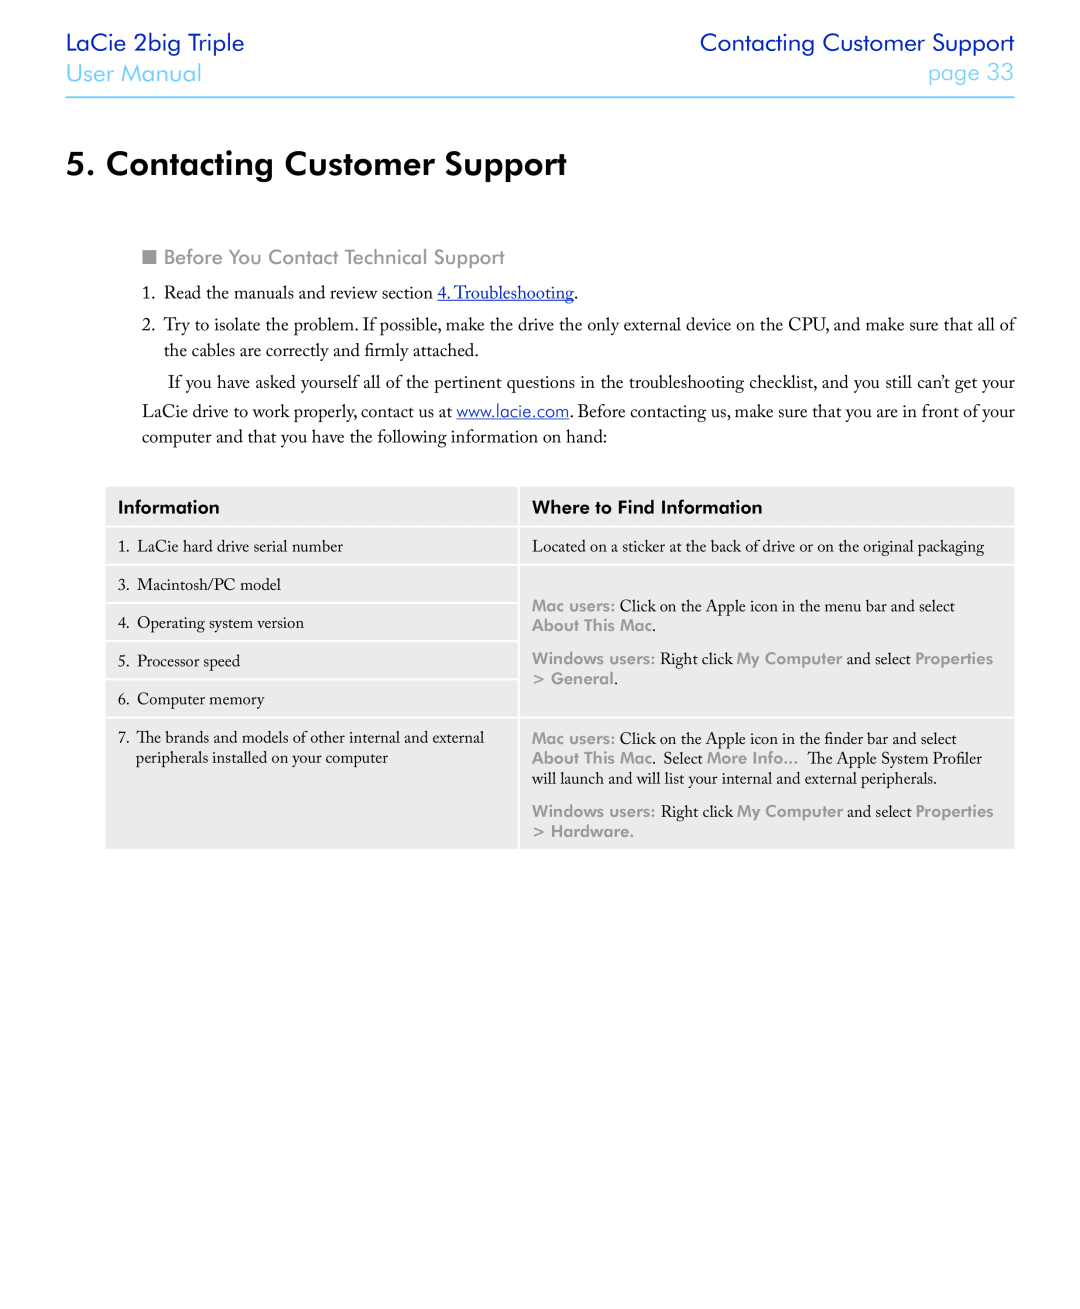 LaCie 2big triple Contacting Customer Support, Before You Contact Technical Support, Information, LaCie 2big Triple, page 